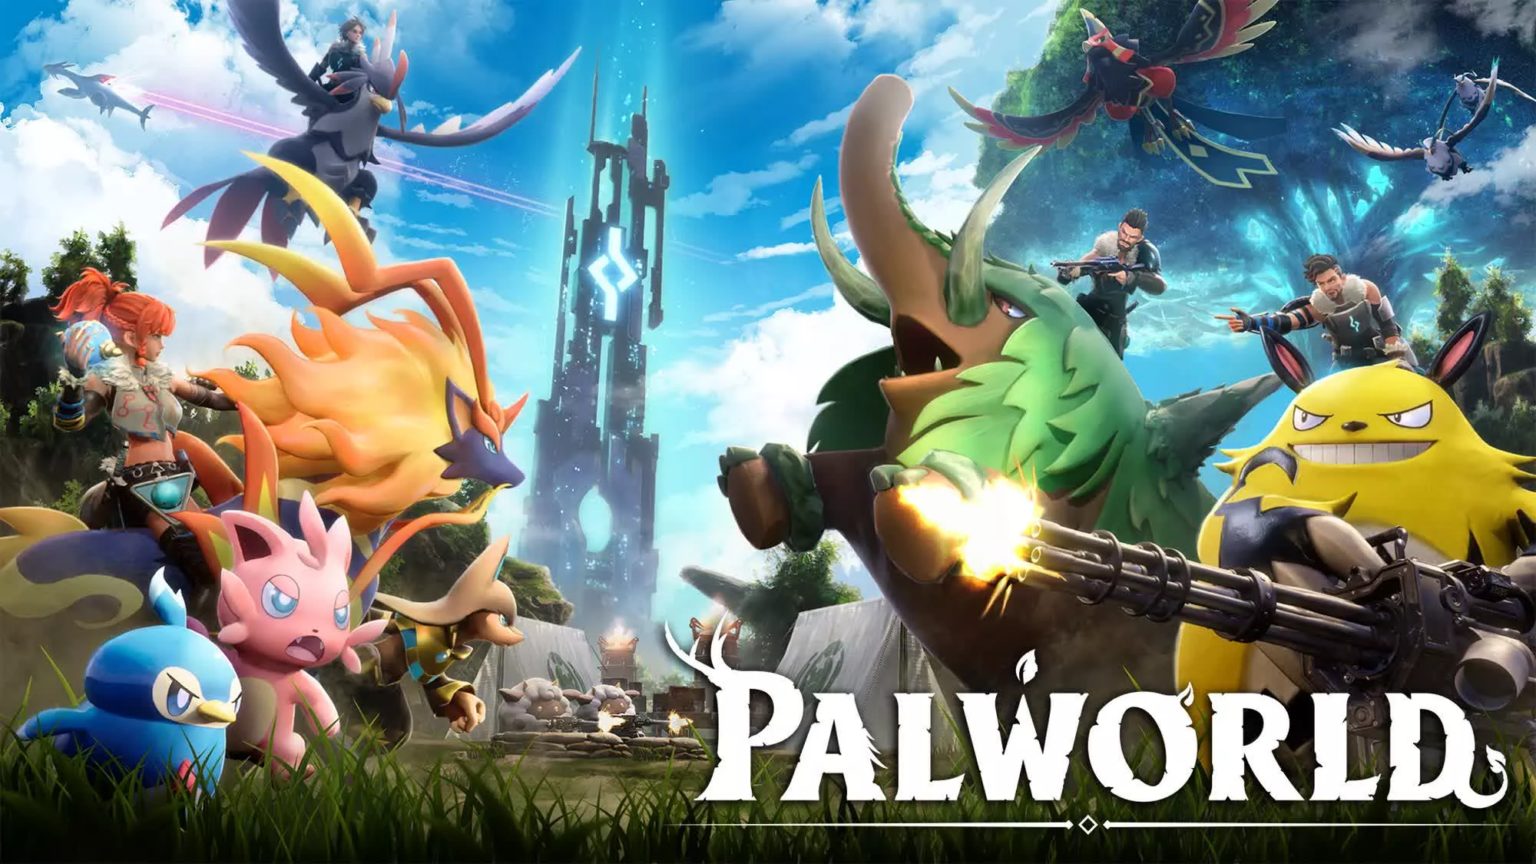 Palworld hits 19 million players on PC and Xbox within two weeks of launch